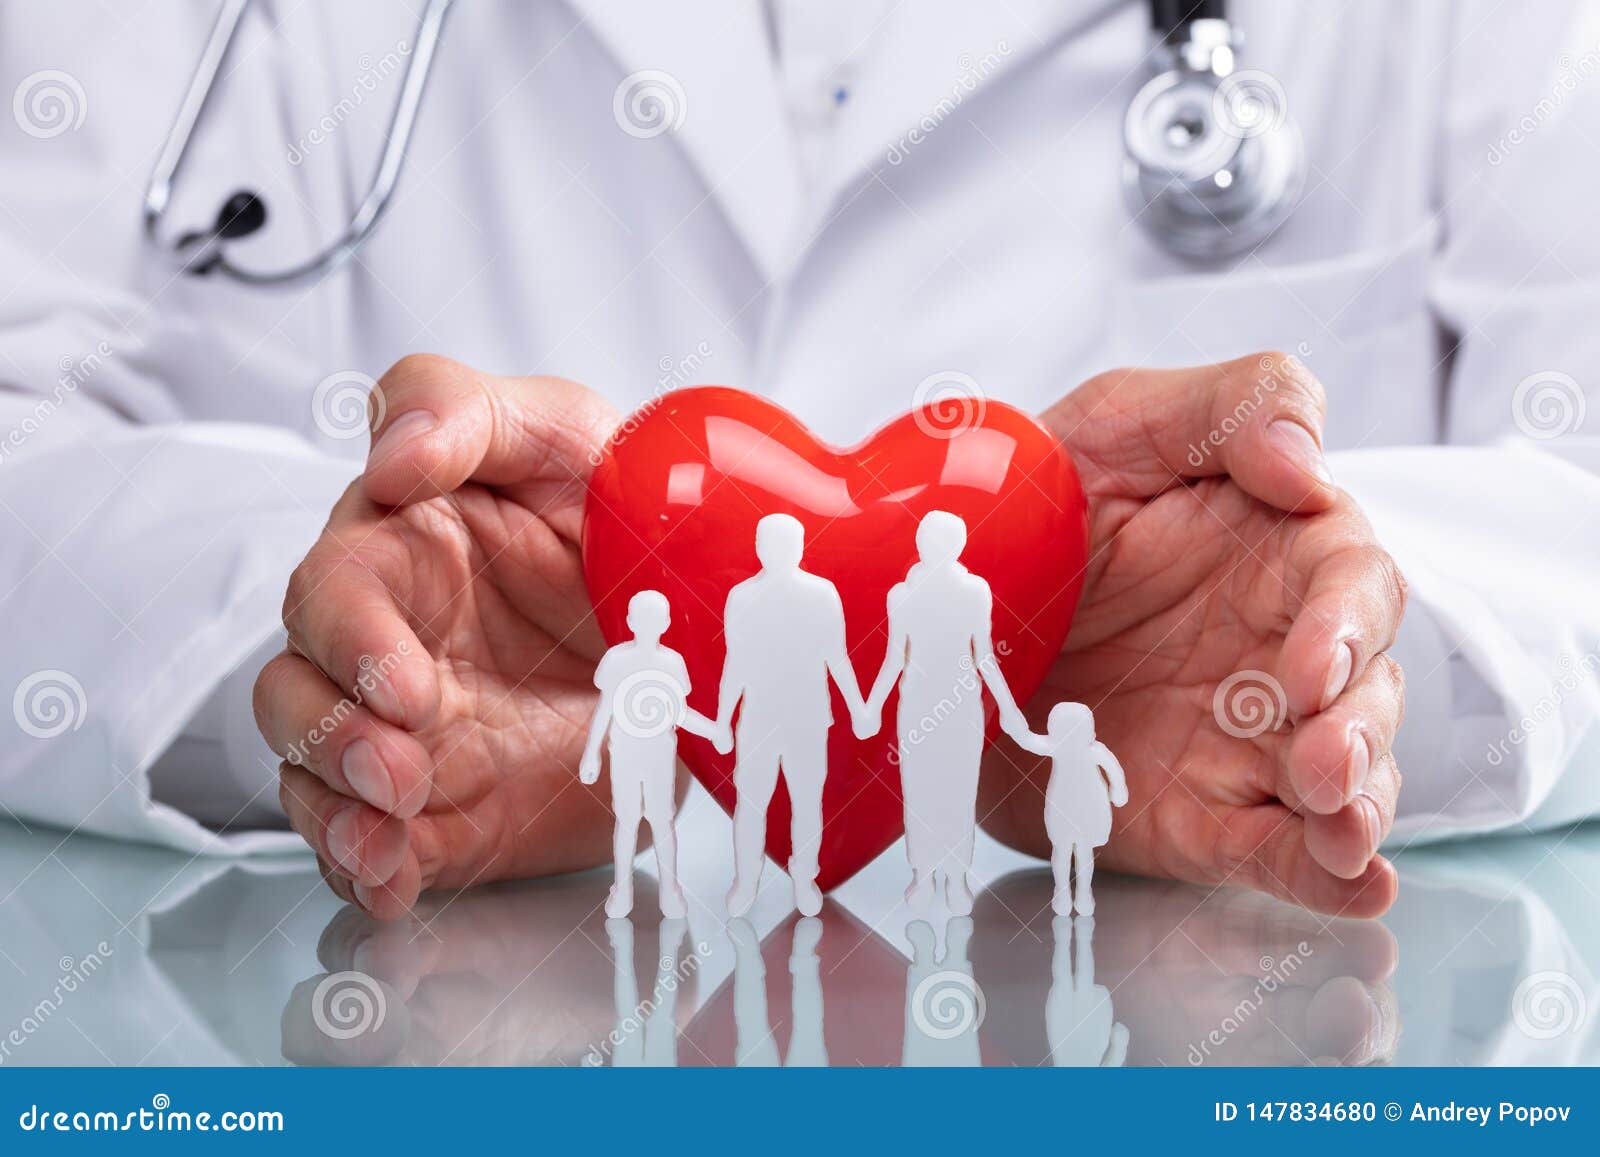 doctor protecting red heart with family figure